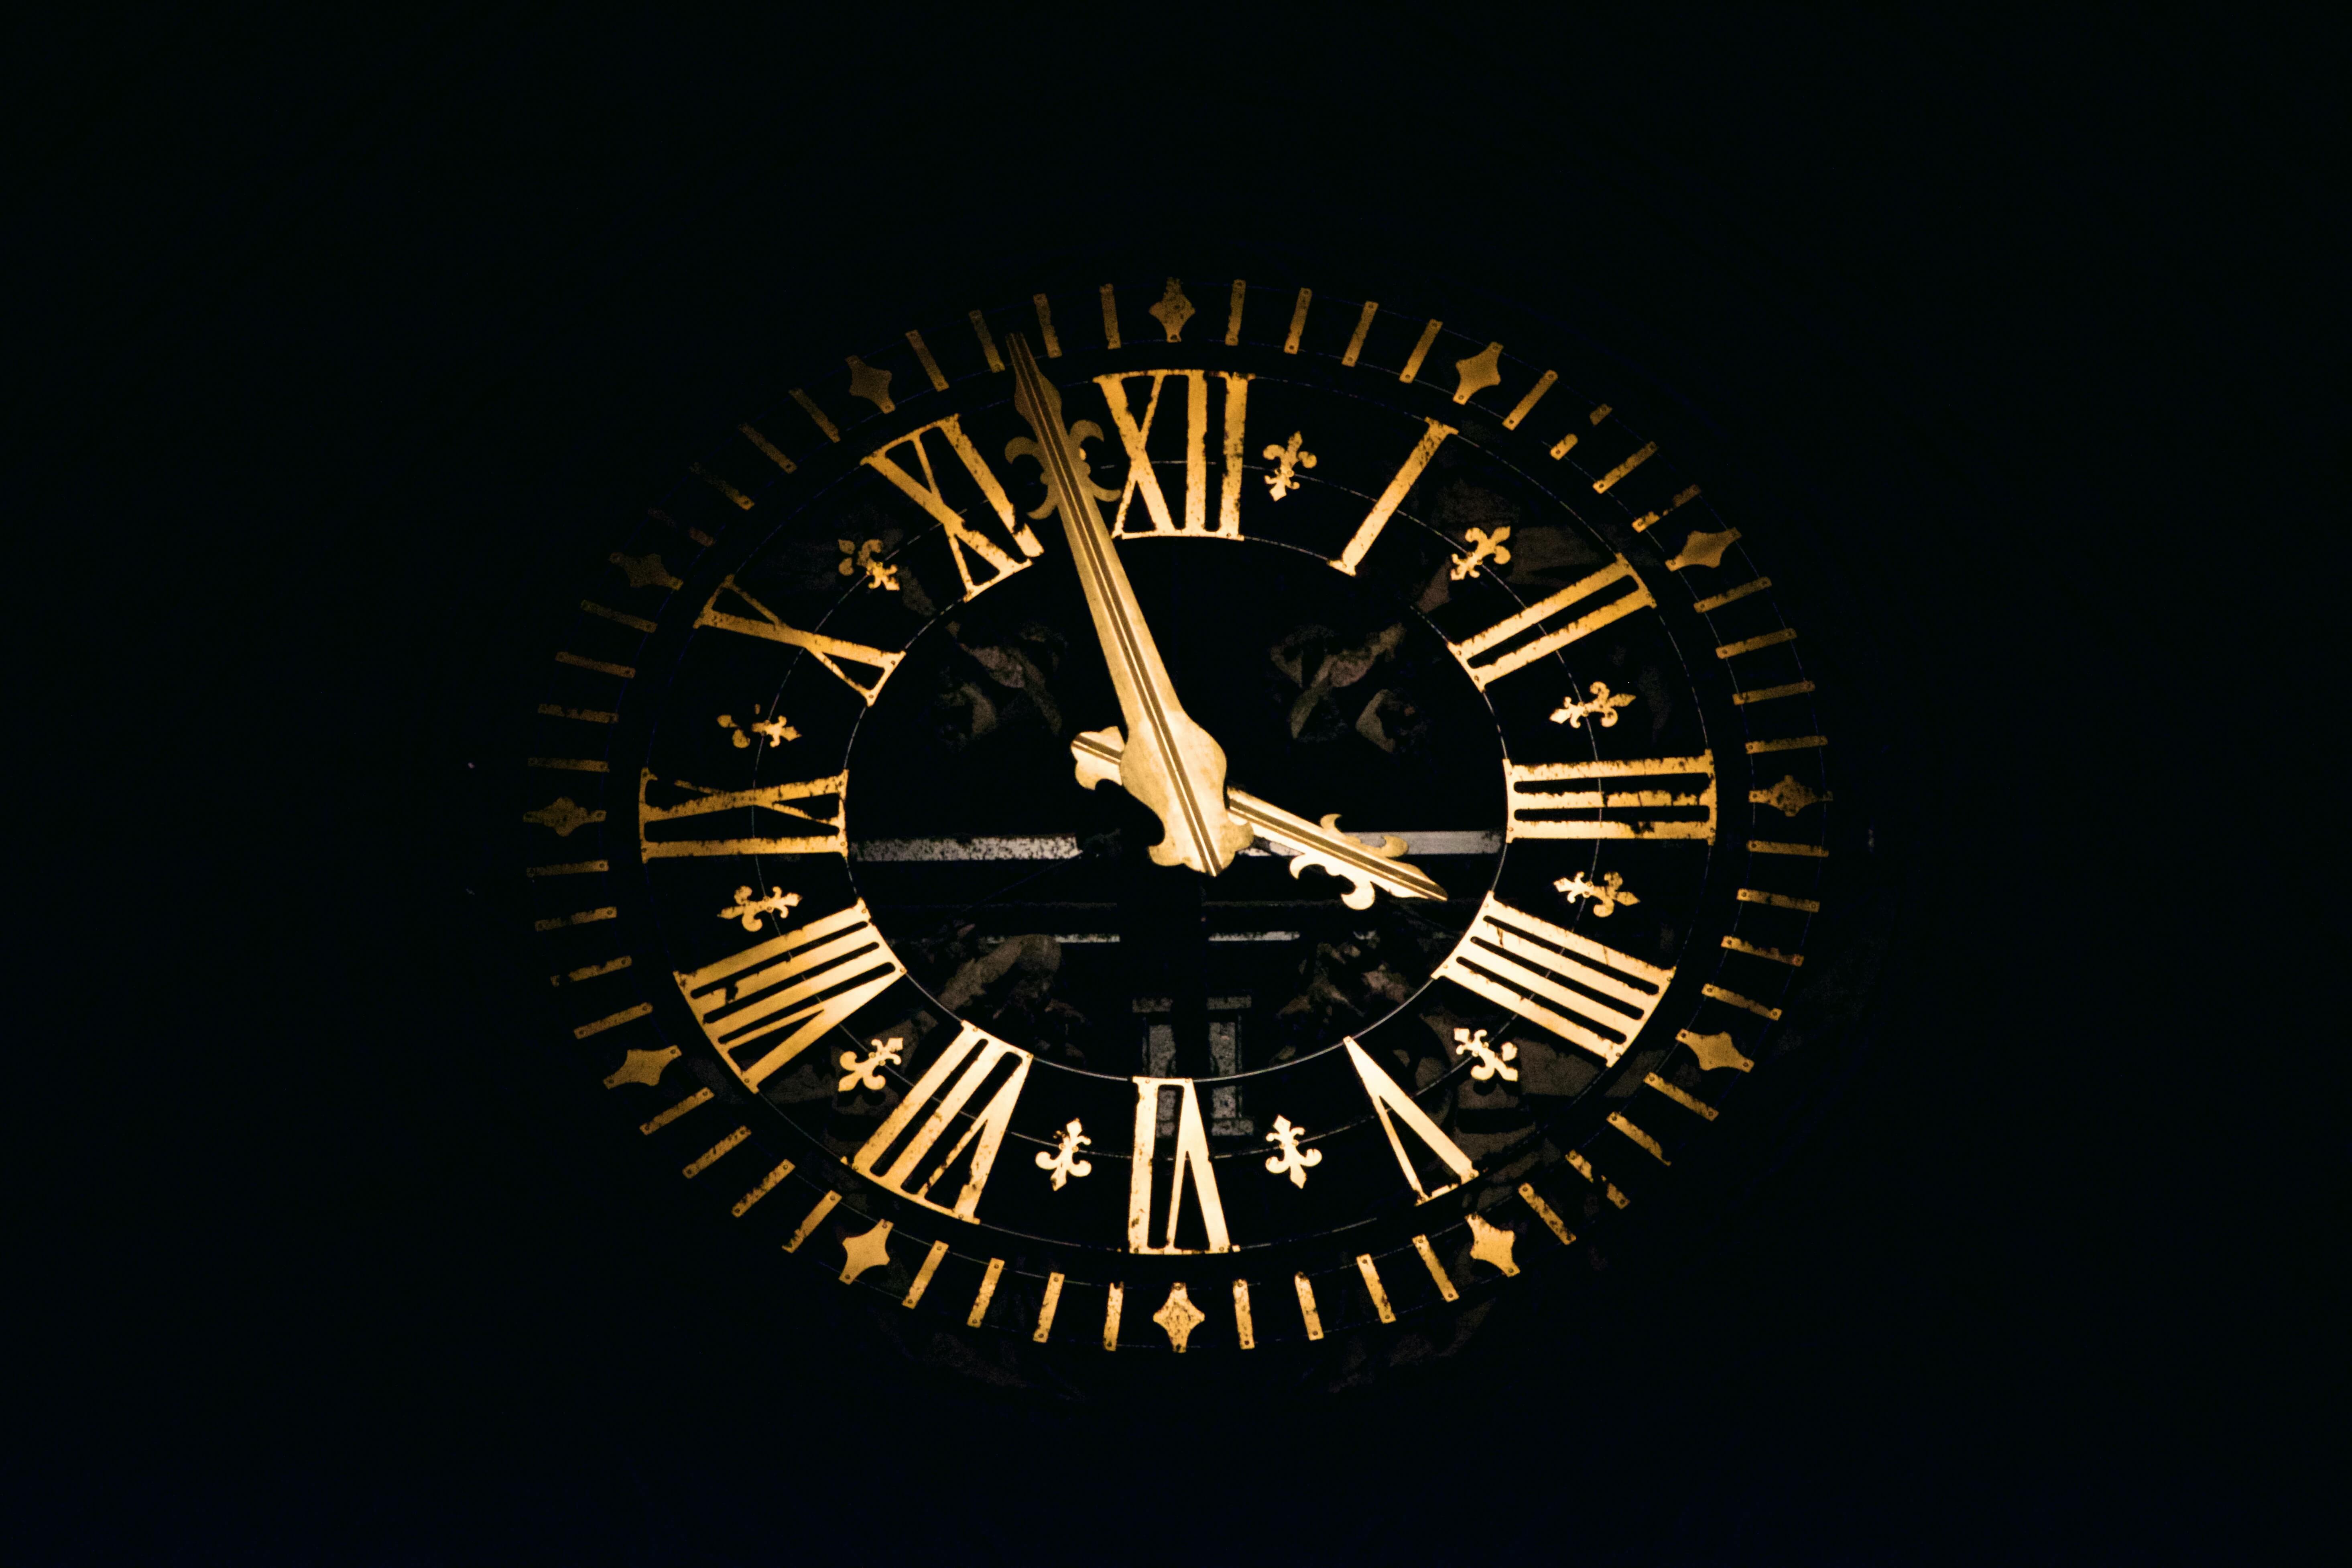 A clock with Roman numerals